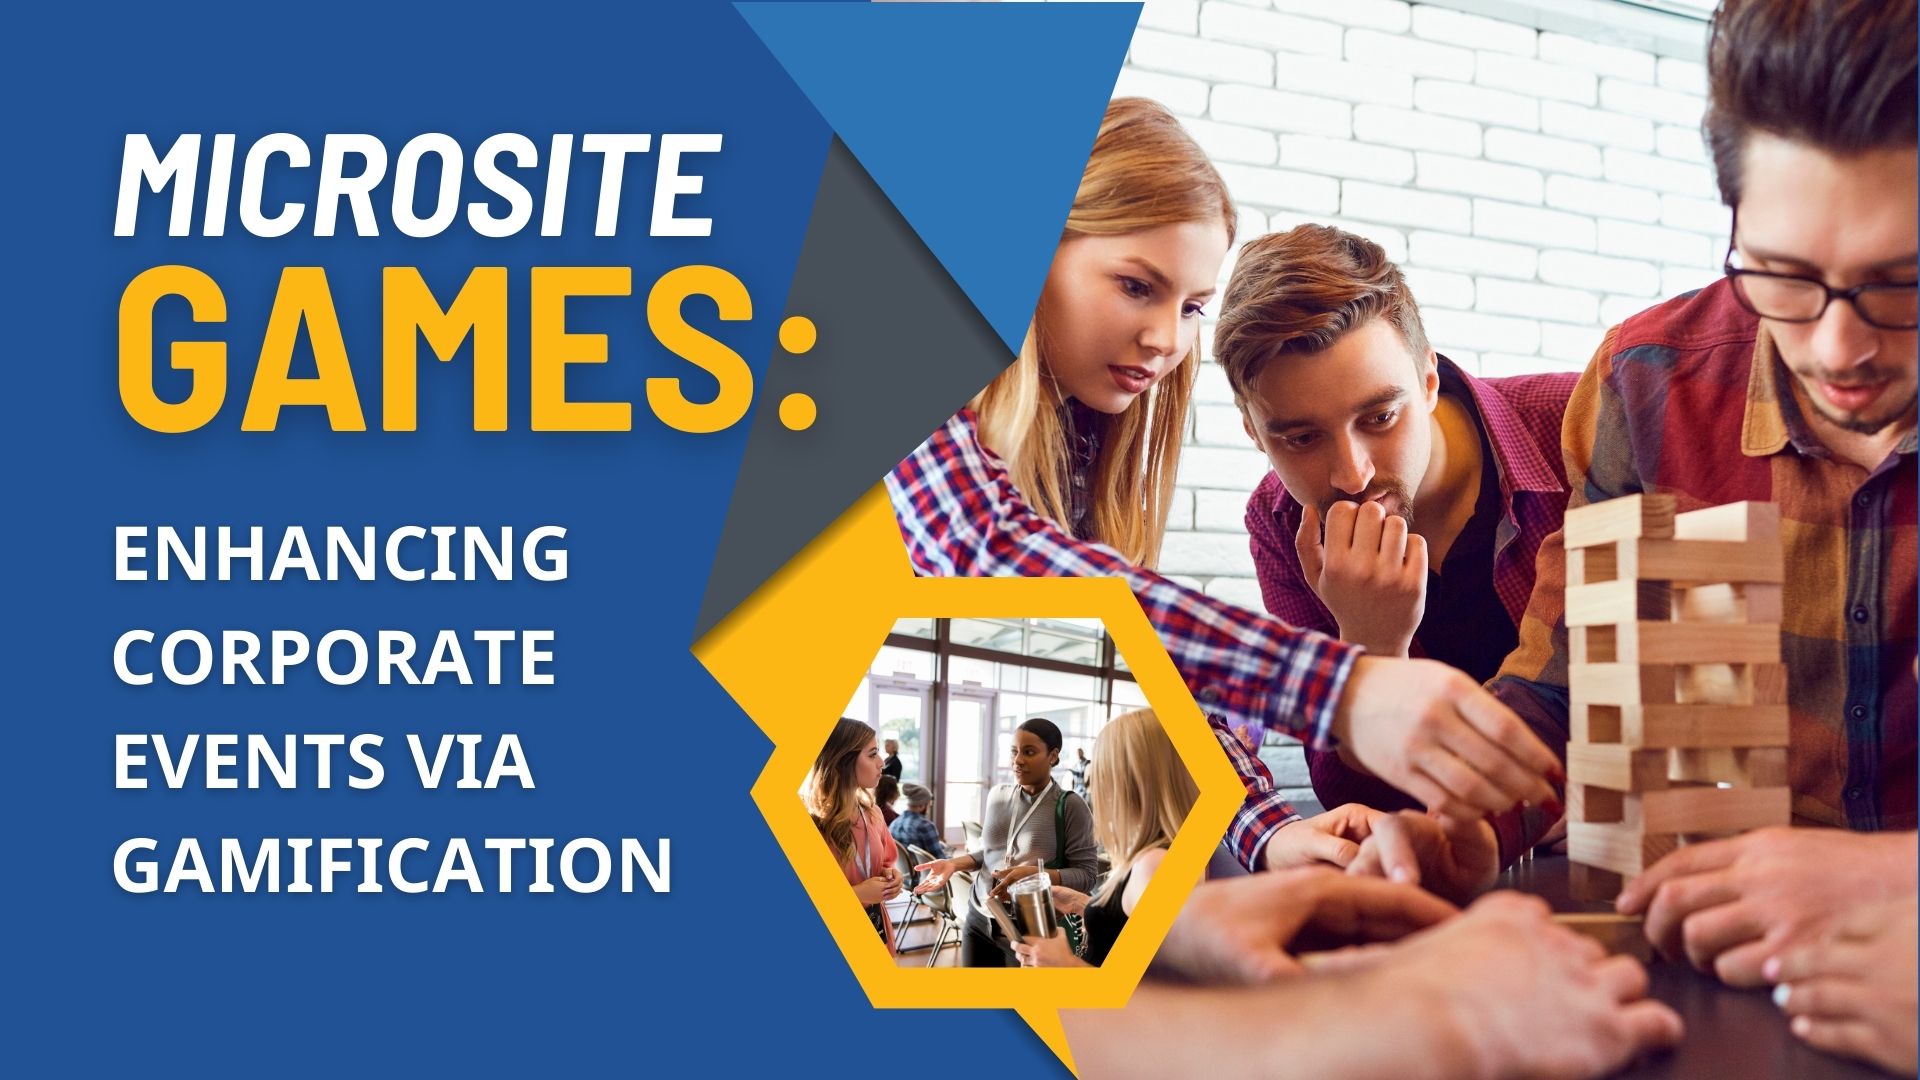 Microsite Games: Enhancing Corporate Events Via Gamification